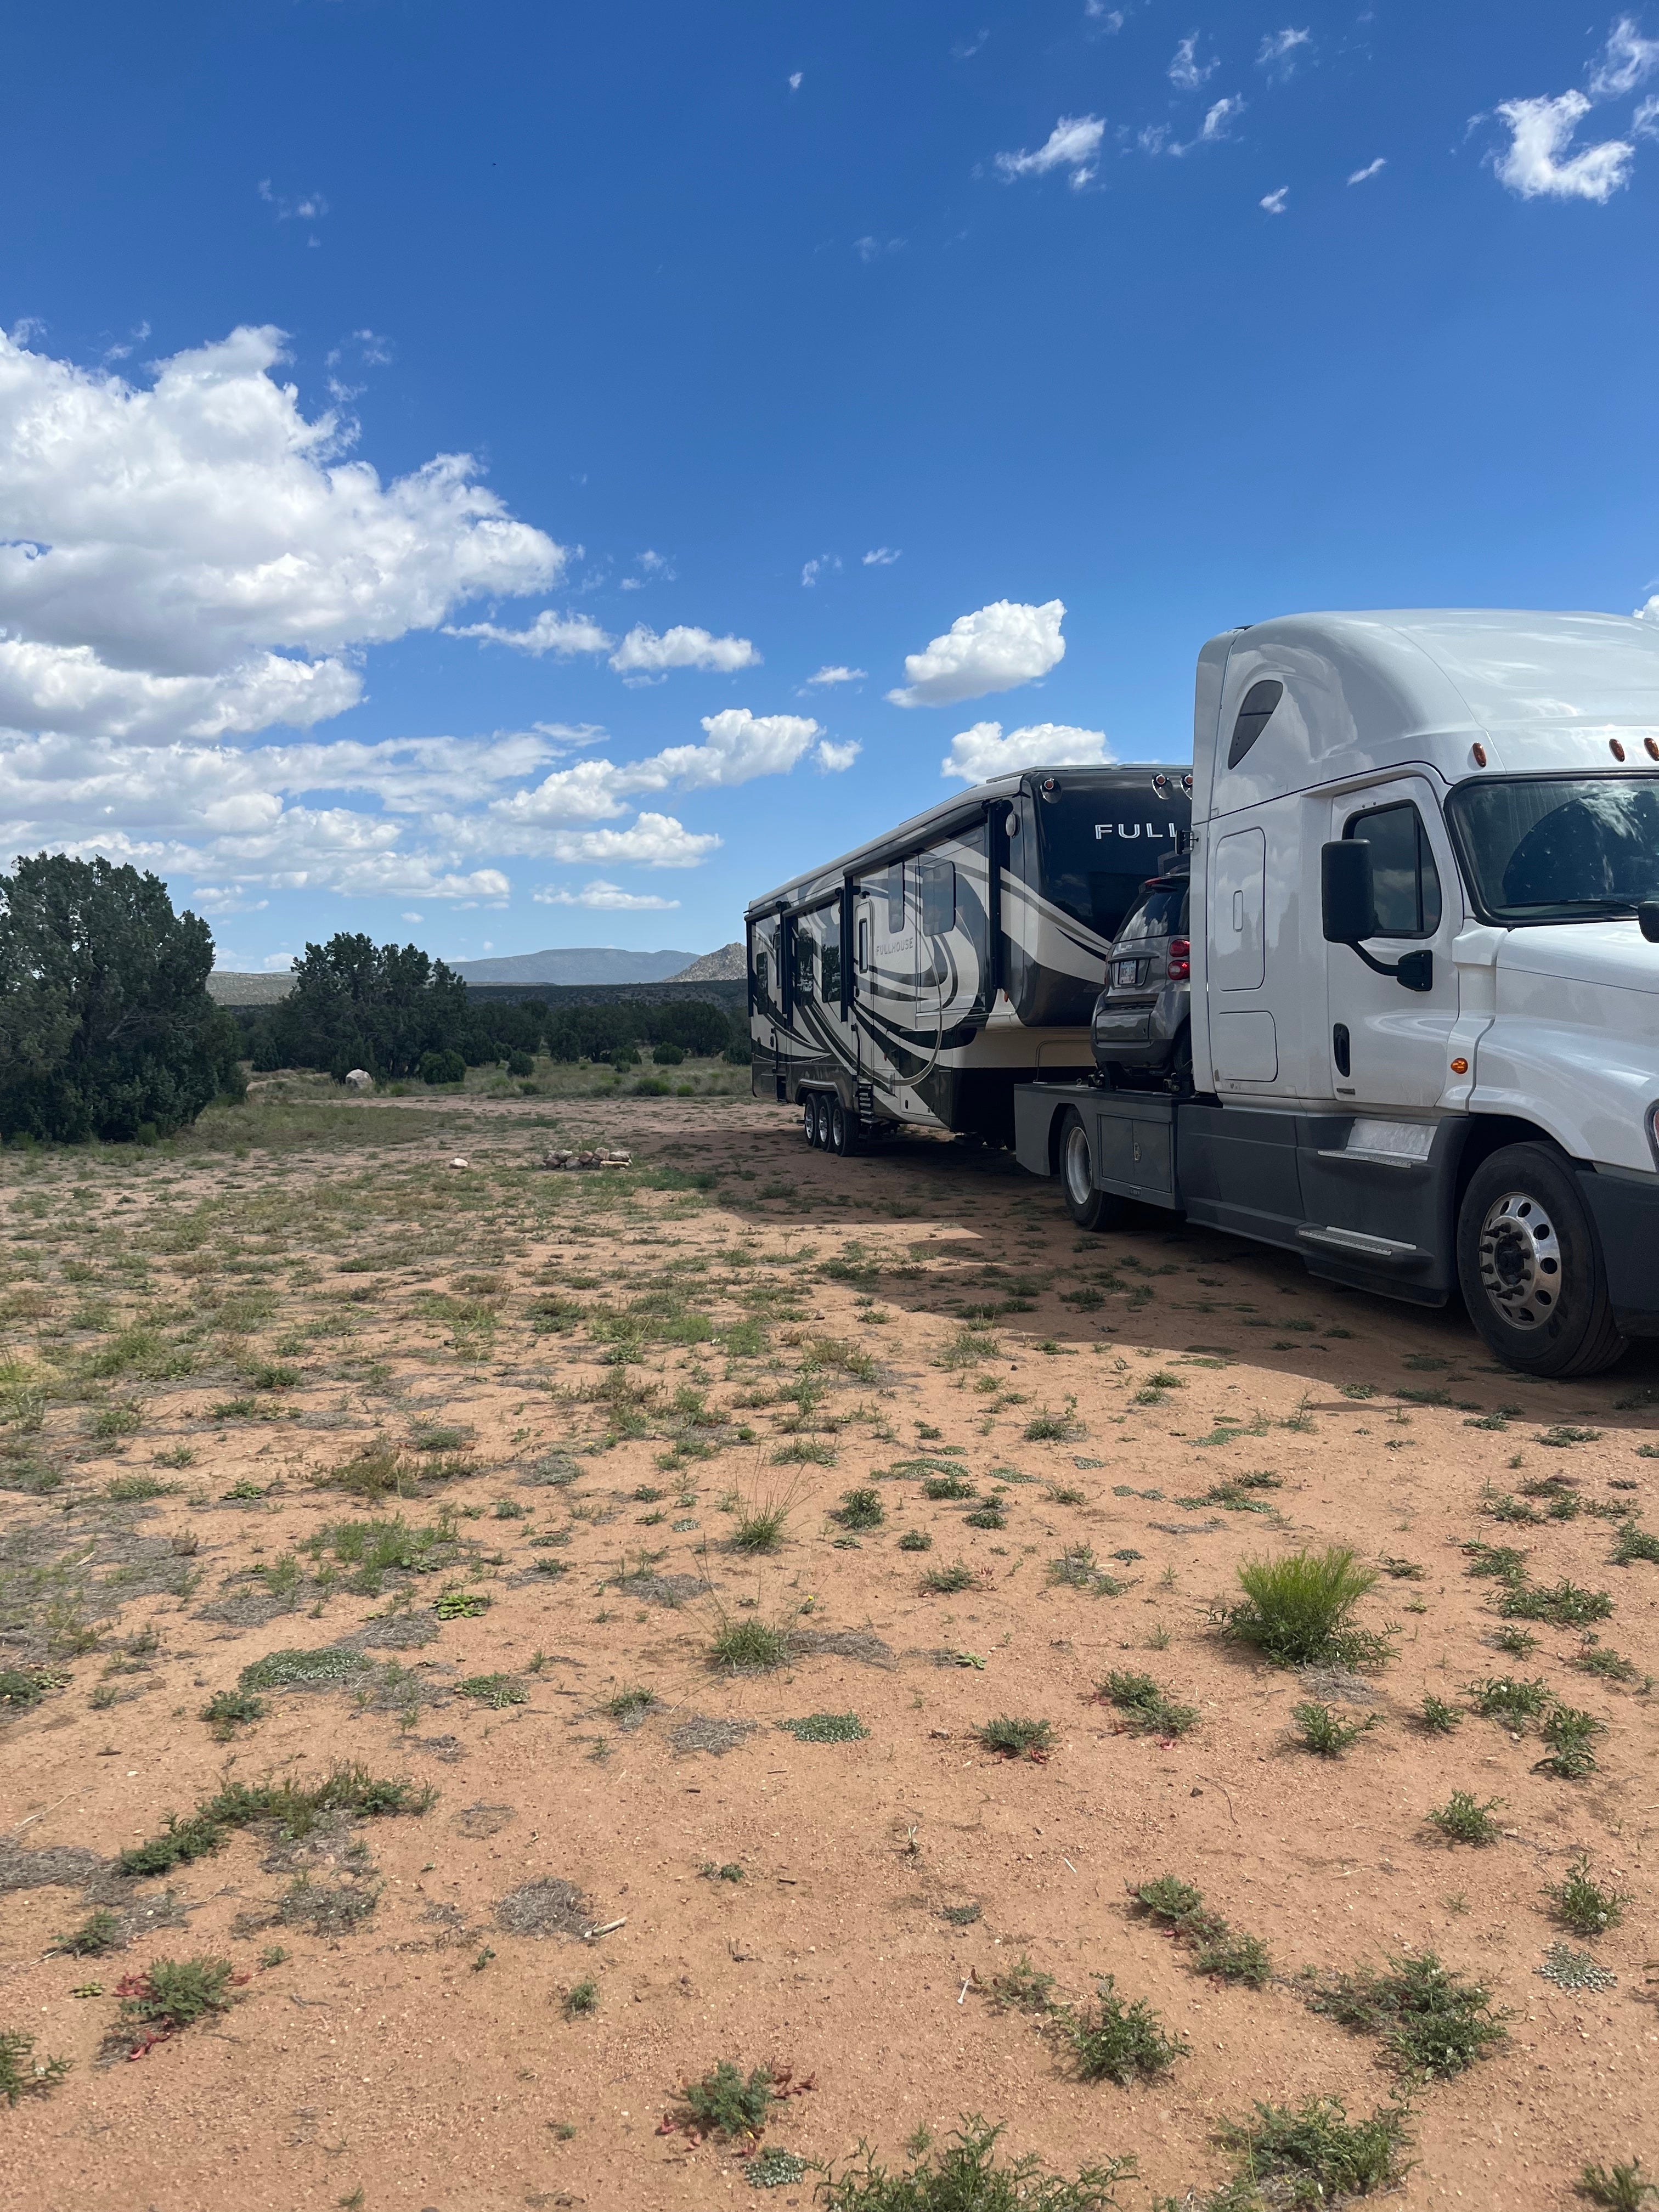 Camper submitted image from Crozier Ranch on Route 66 - 1